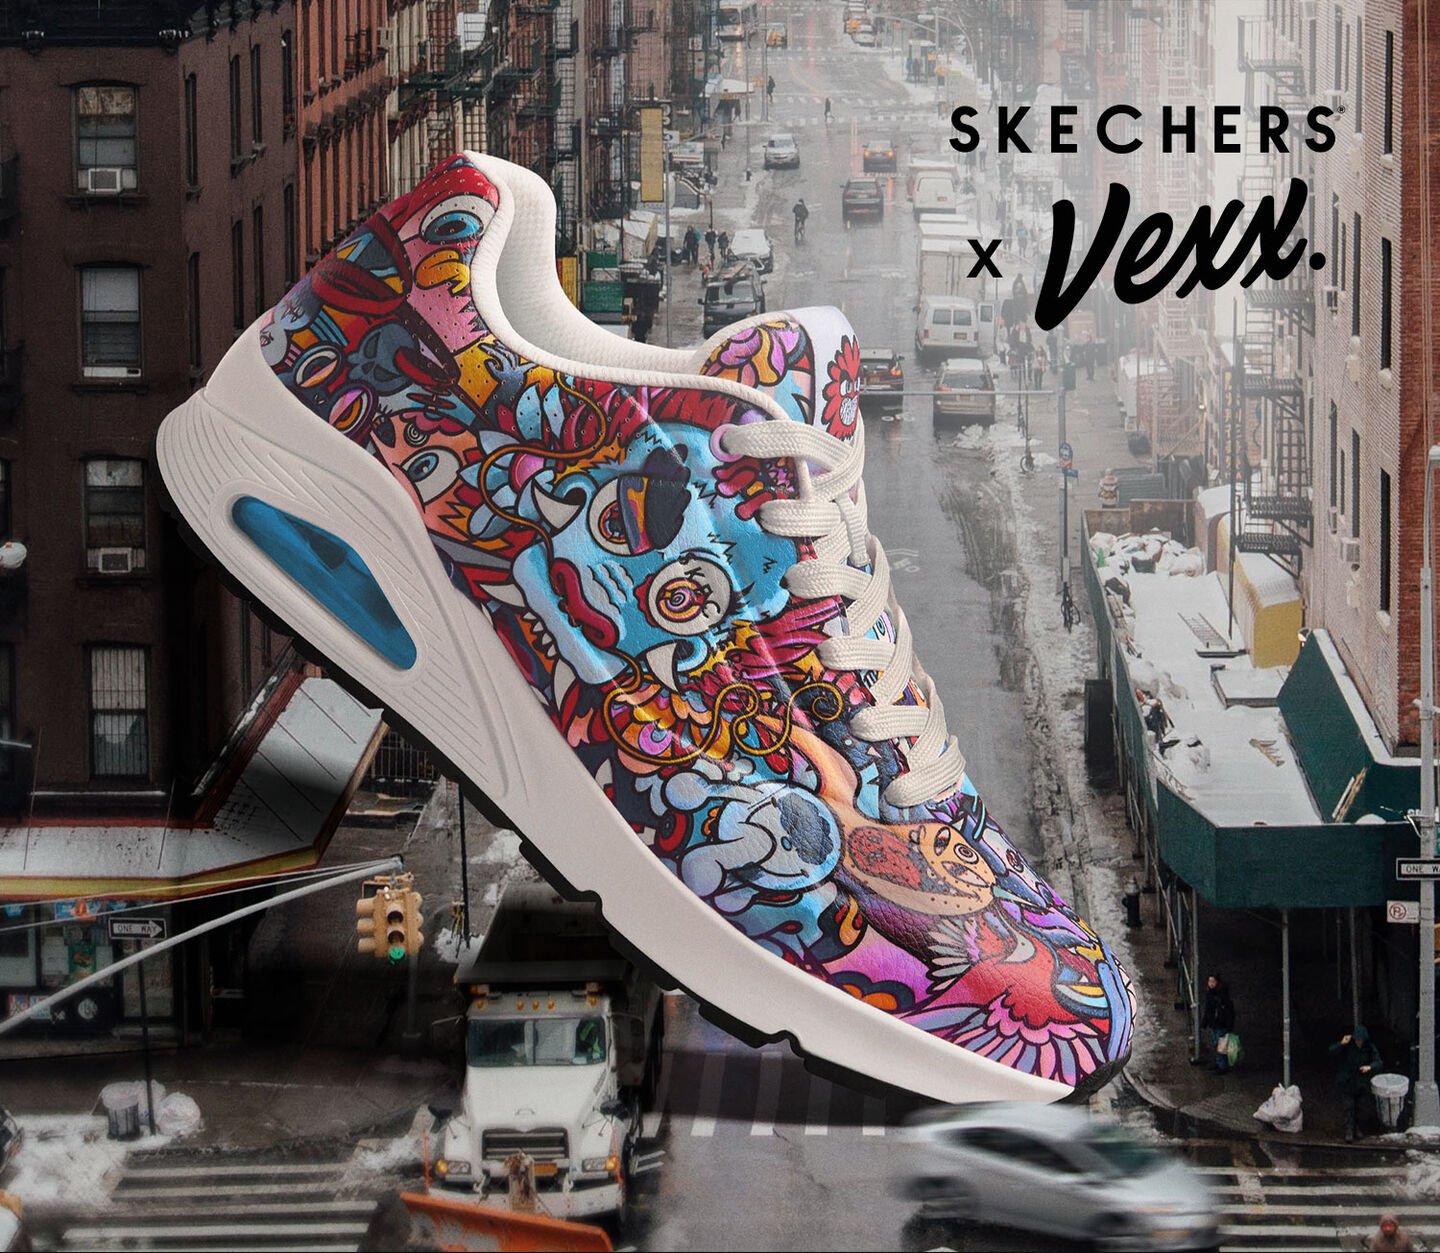 SKECHERS USA on X: Taking in the scenery! 👟😍 #Skechers #streetstyle  #comfort #fashion #style #shoes #SkechersStyle Influencer:   Featured style:    / X